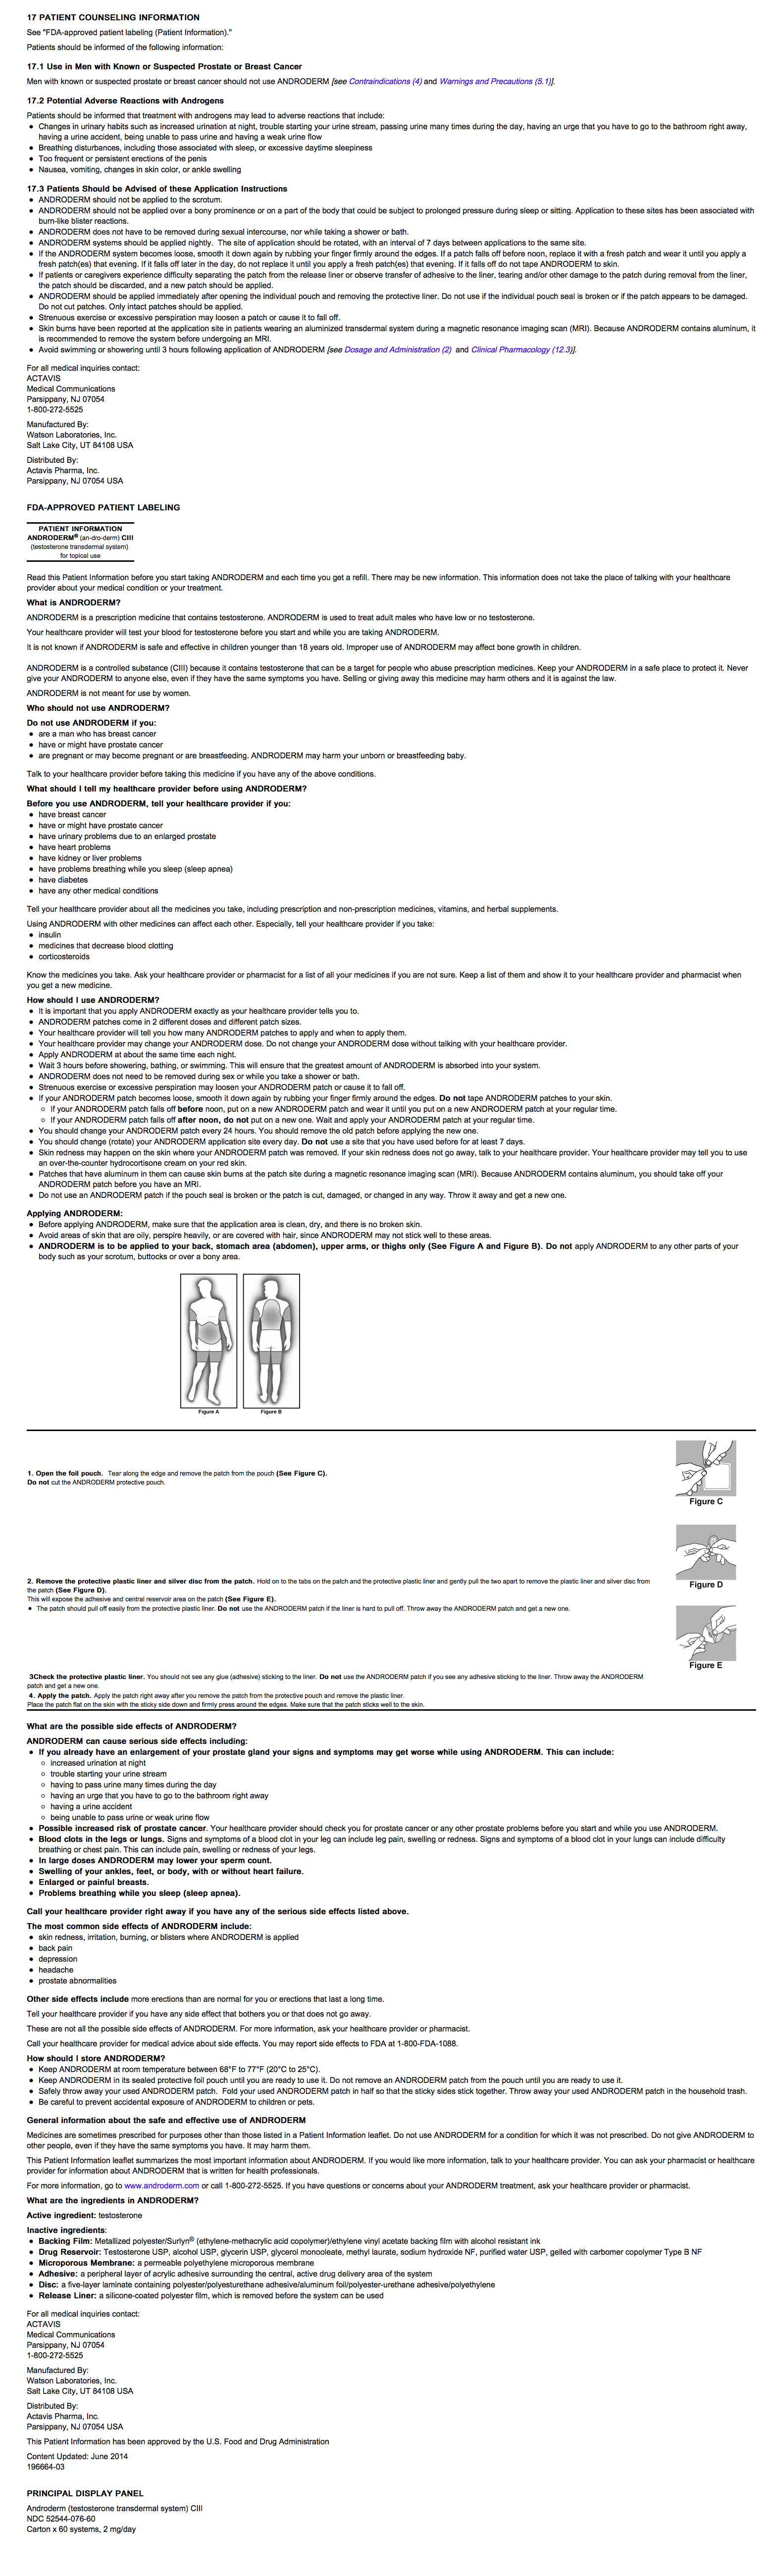 File:Testosterone patient information 01.png